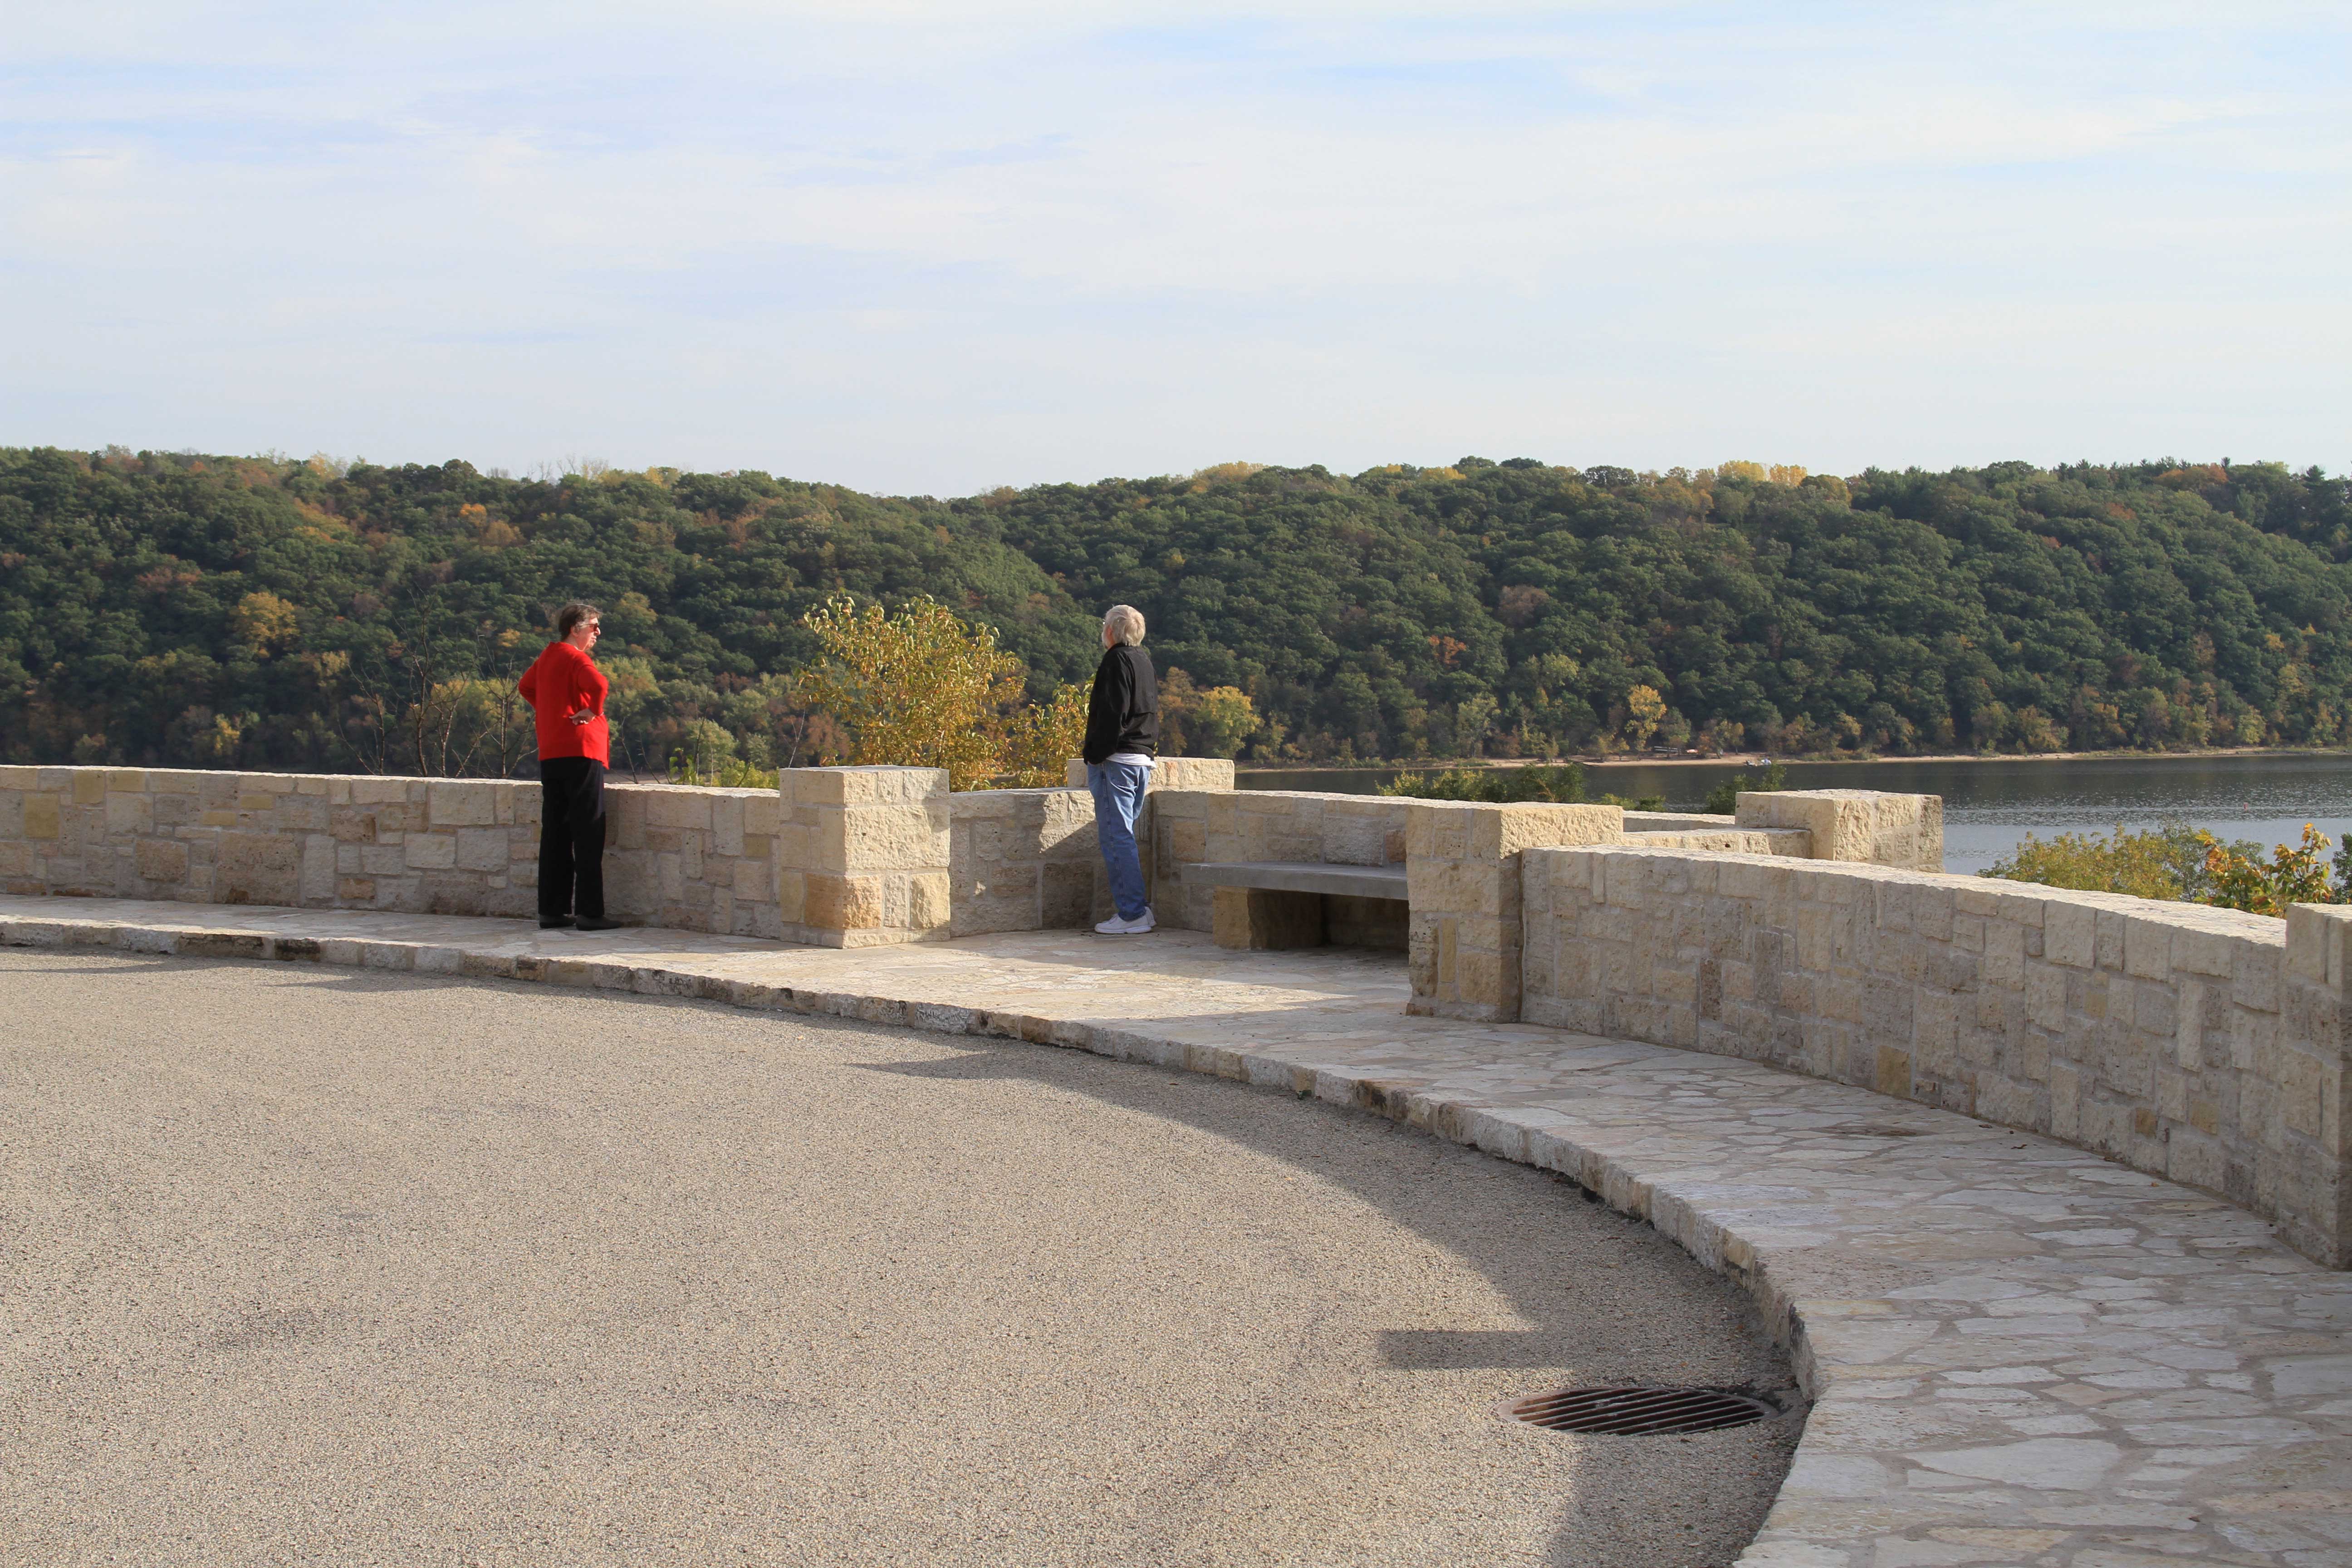 Lake St. Croix Overlook Restoration, also known as Stillwater Overlook South